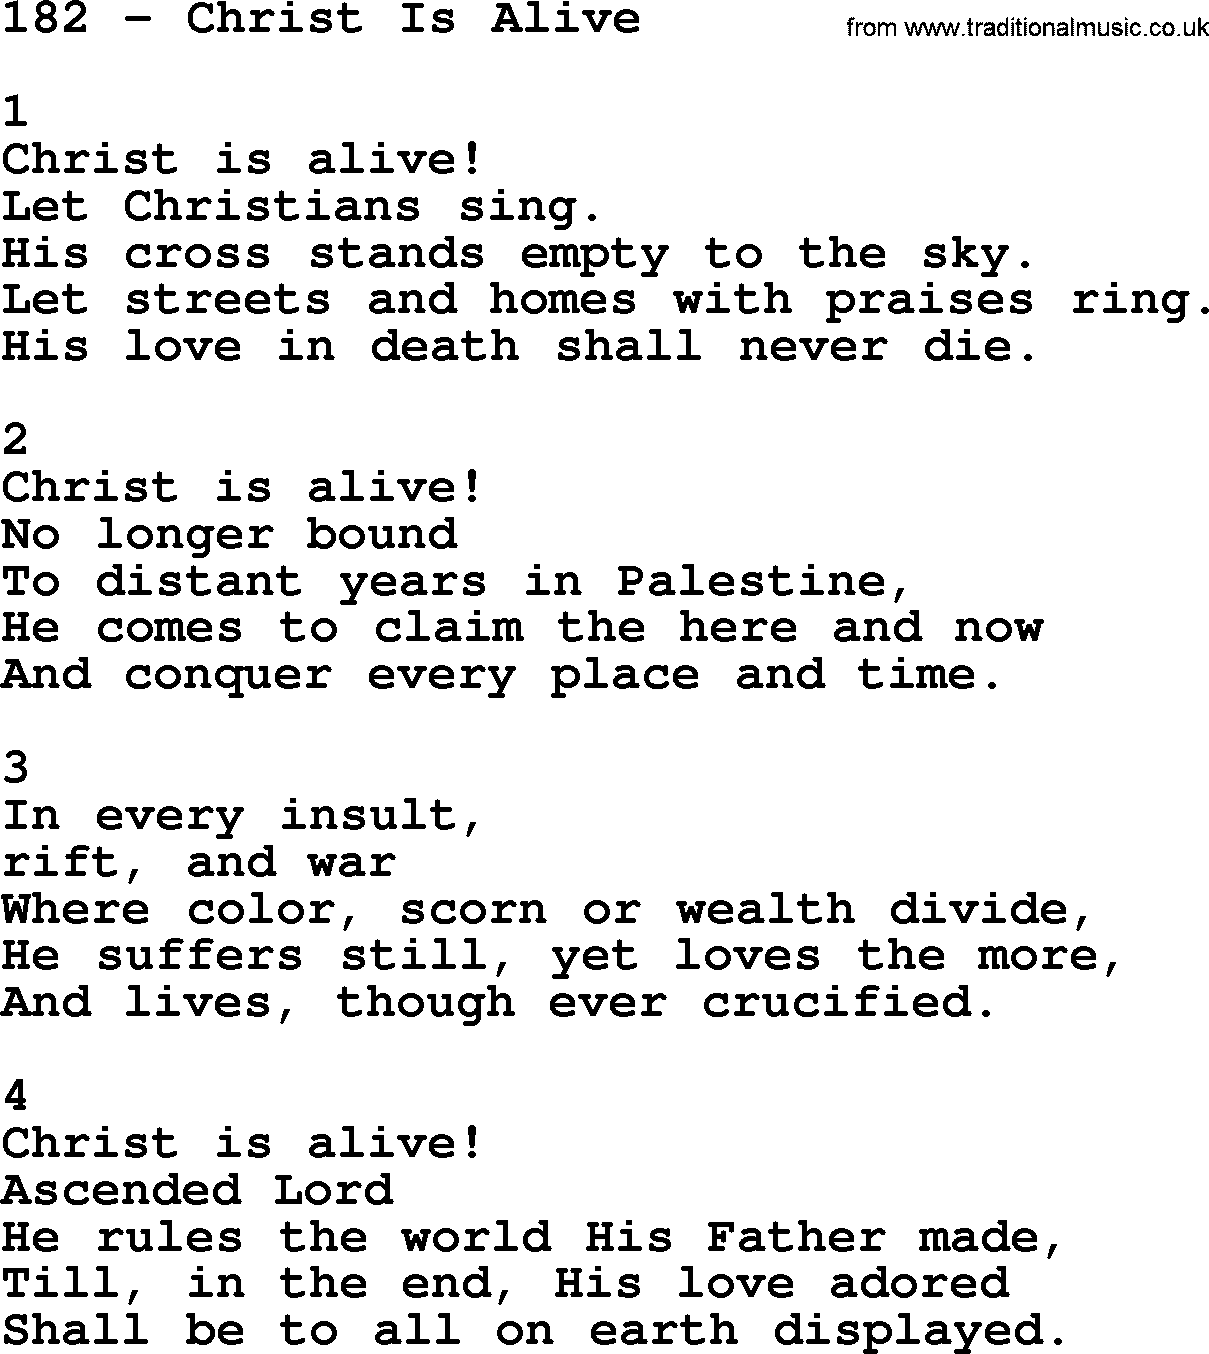 Complete Adventis Hymnal, title: 182-Christ Is Alive, with lyrics, midi, mp3, powerpoints(PPT) and PDF,